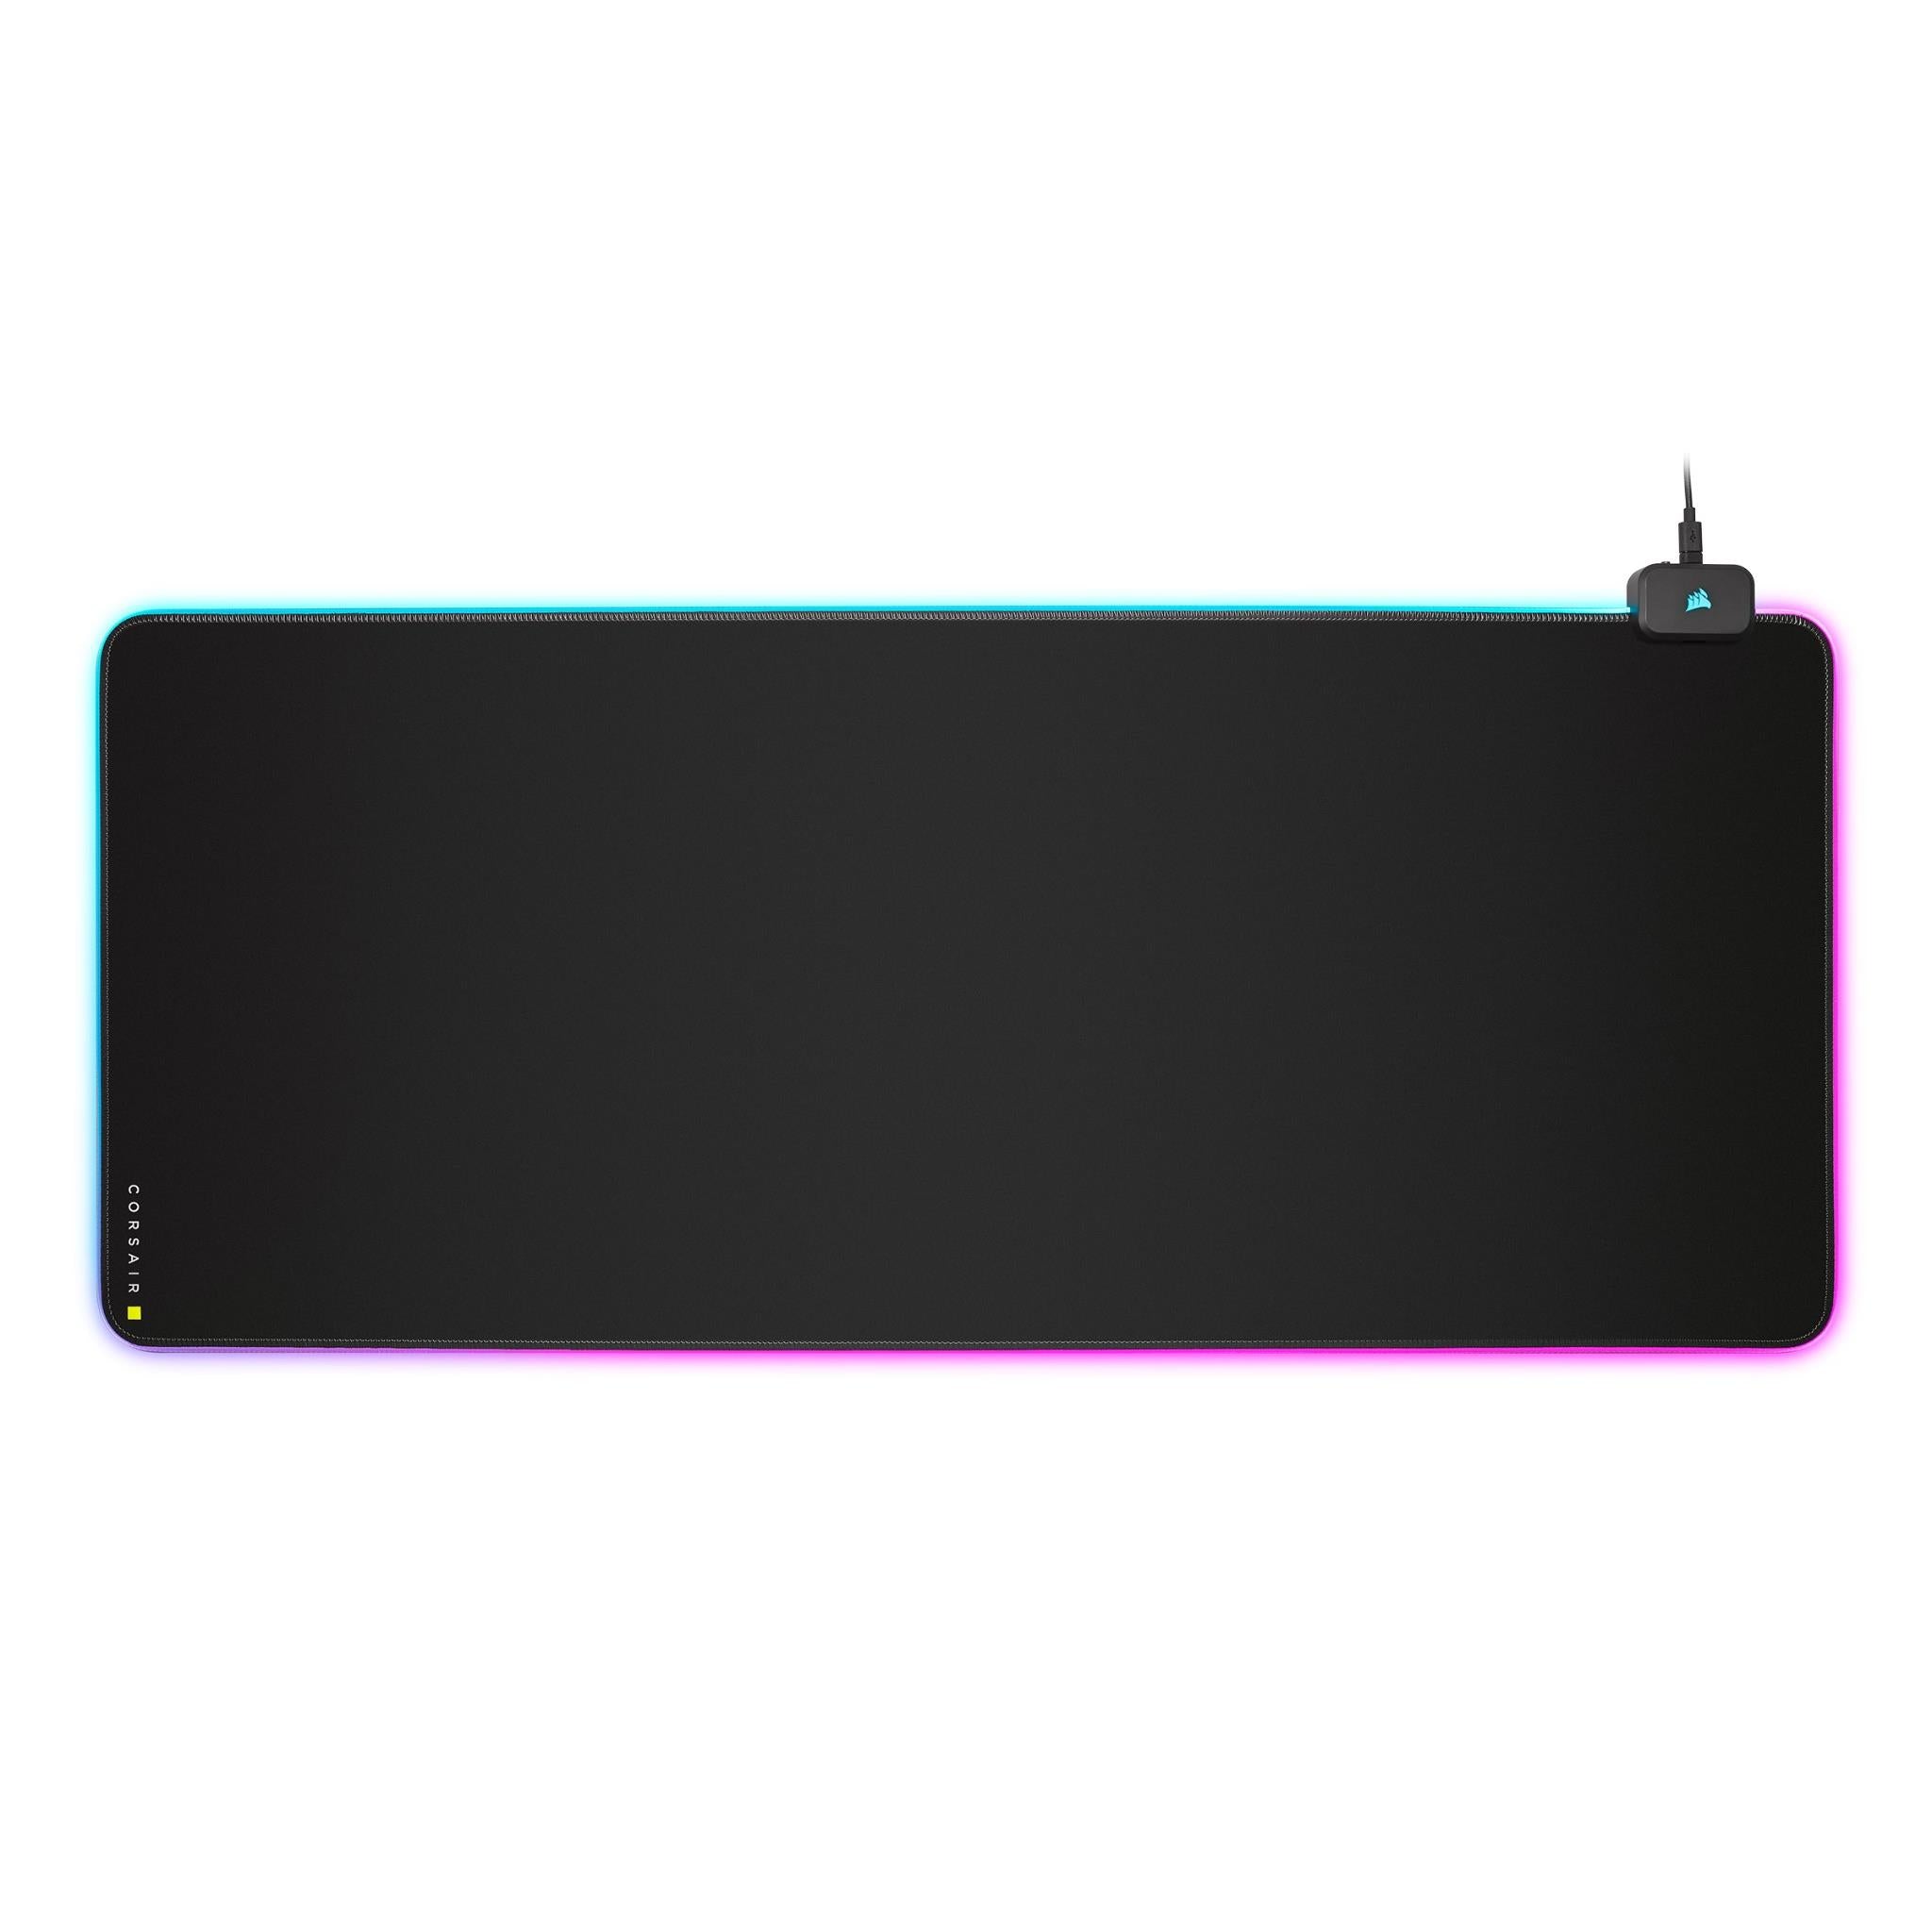 corsair mm700 rgb extended gaming mouse pad (black)